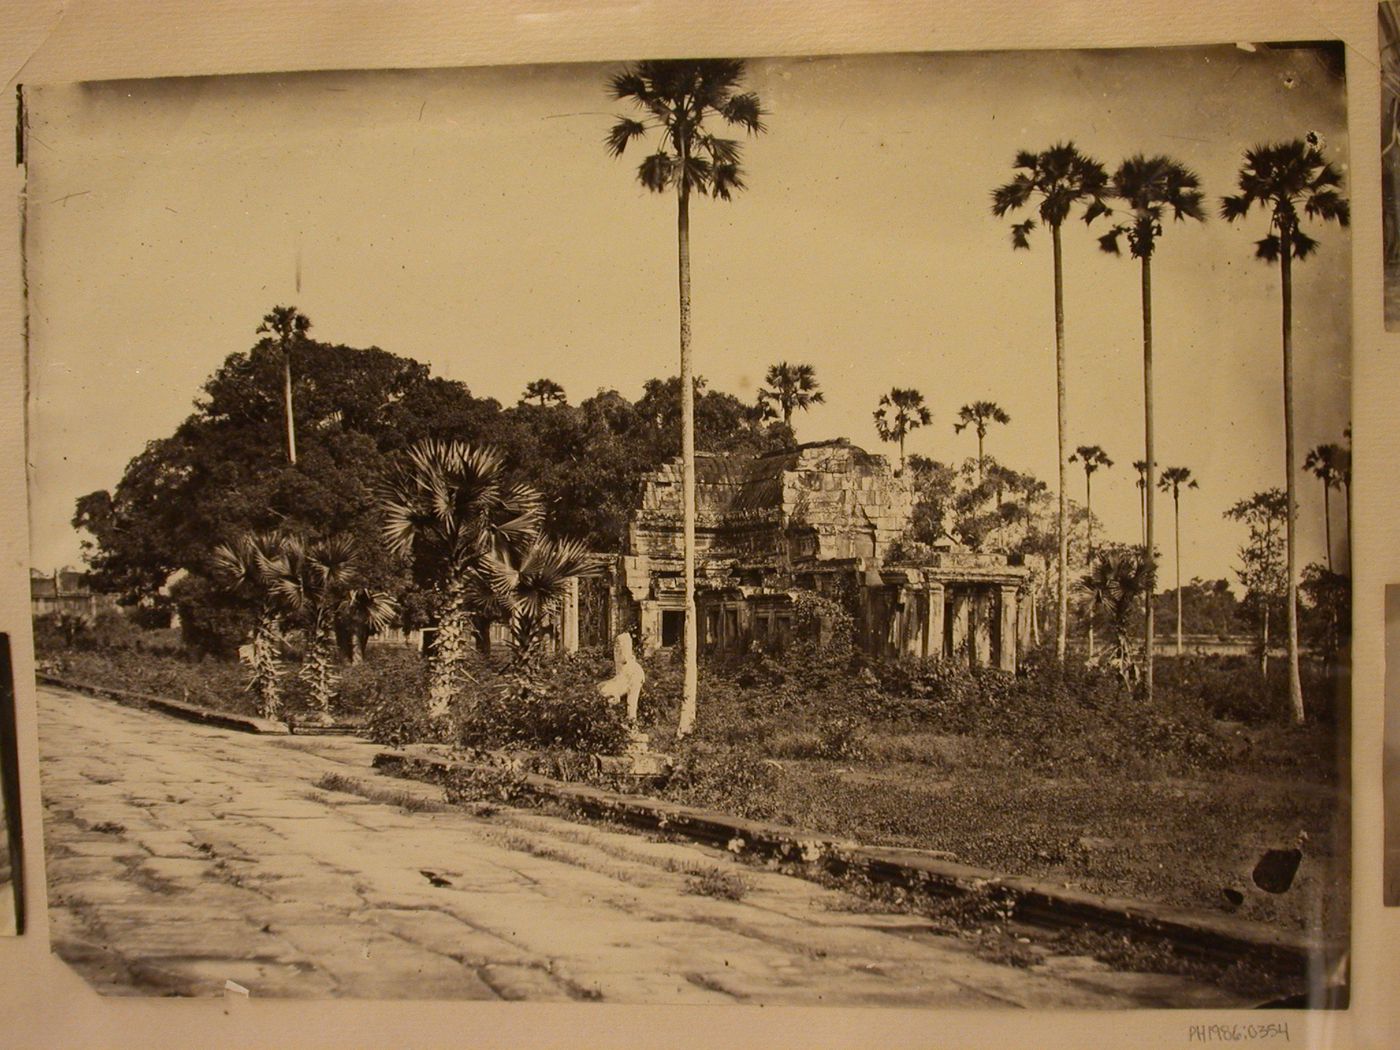 View of the north causeway library showing the causeway in the foreground, Angkor Wat, Siam (now in Cambodia)